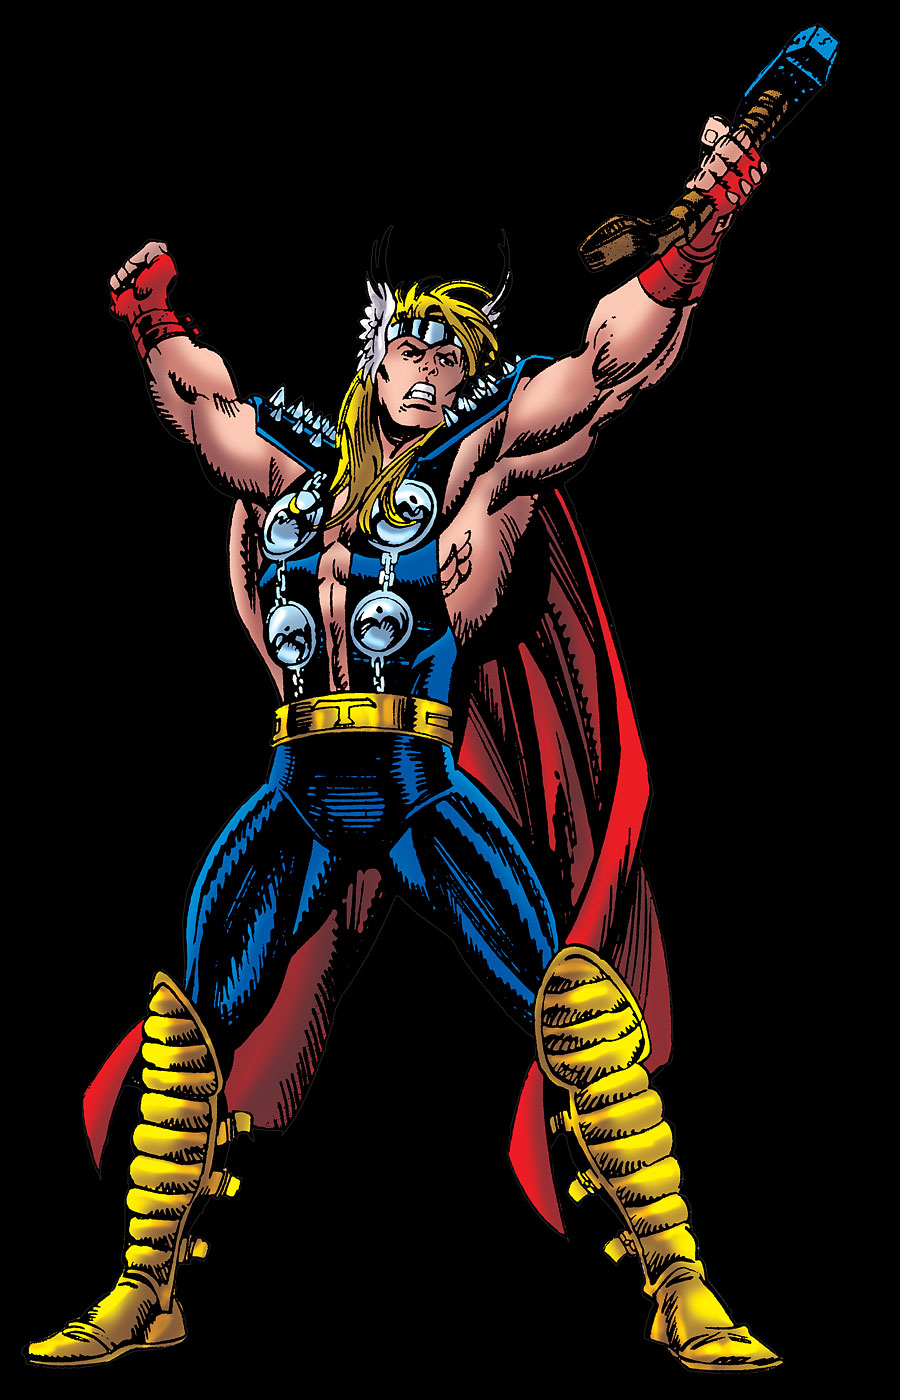 In 1987, an alternate future Thor from the year 2587 named Dargo Ktor was deemed worthy to wield Mjolnir and gain the powers of Thor. He would transform into an avatar of Thor to defeat Loki and his minions.